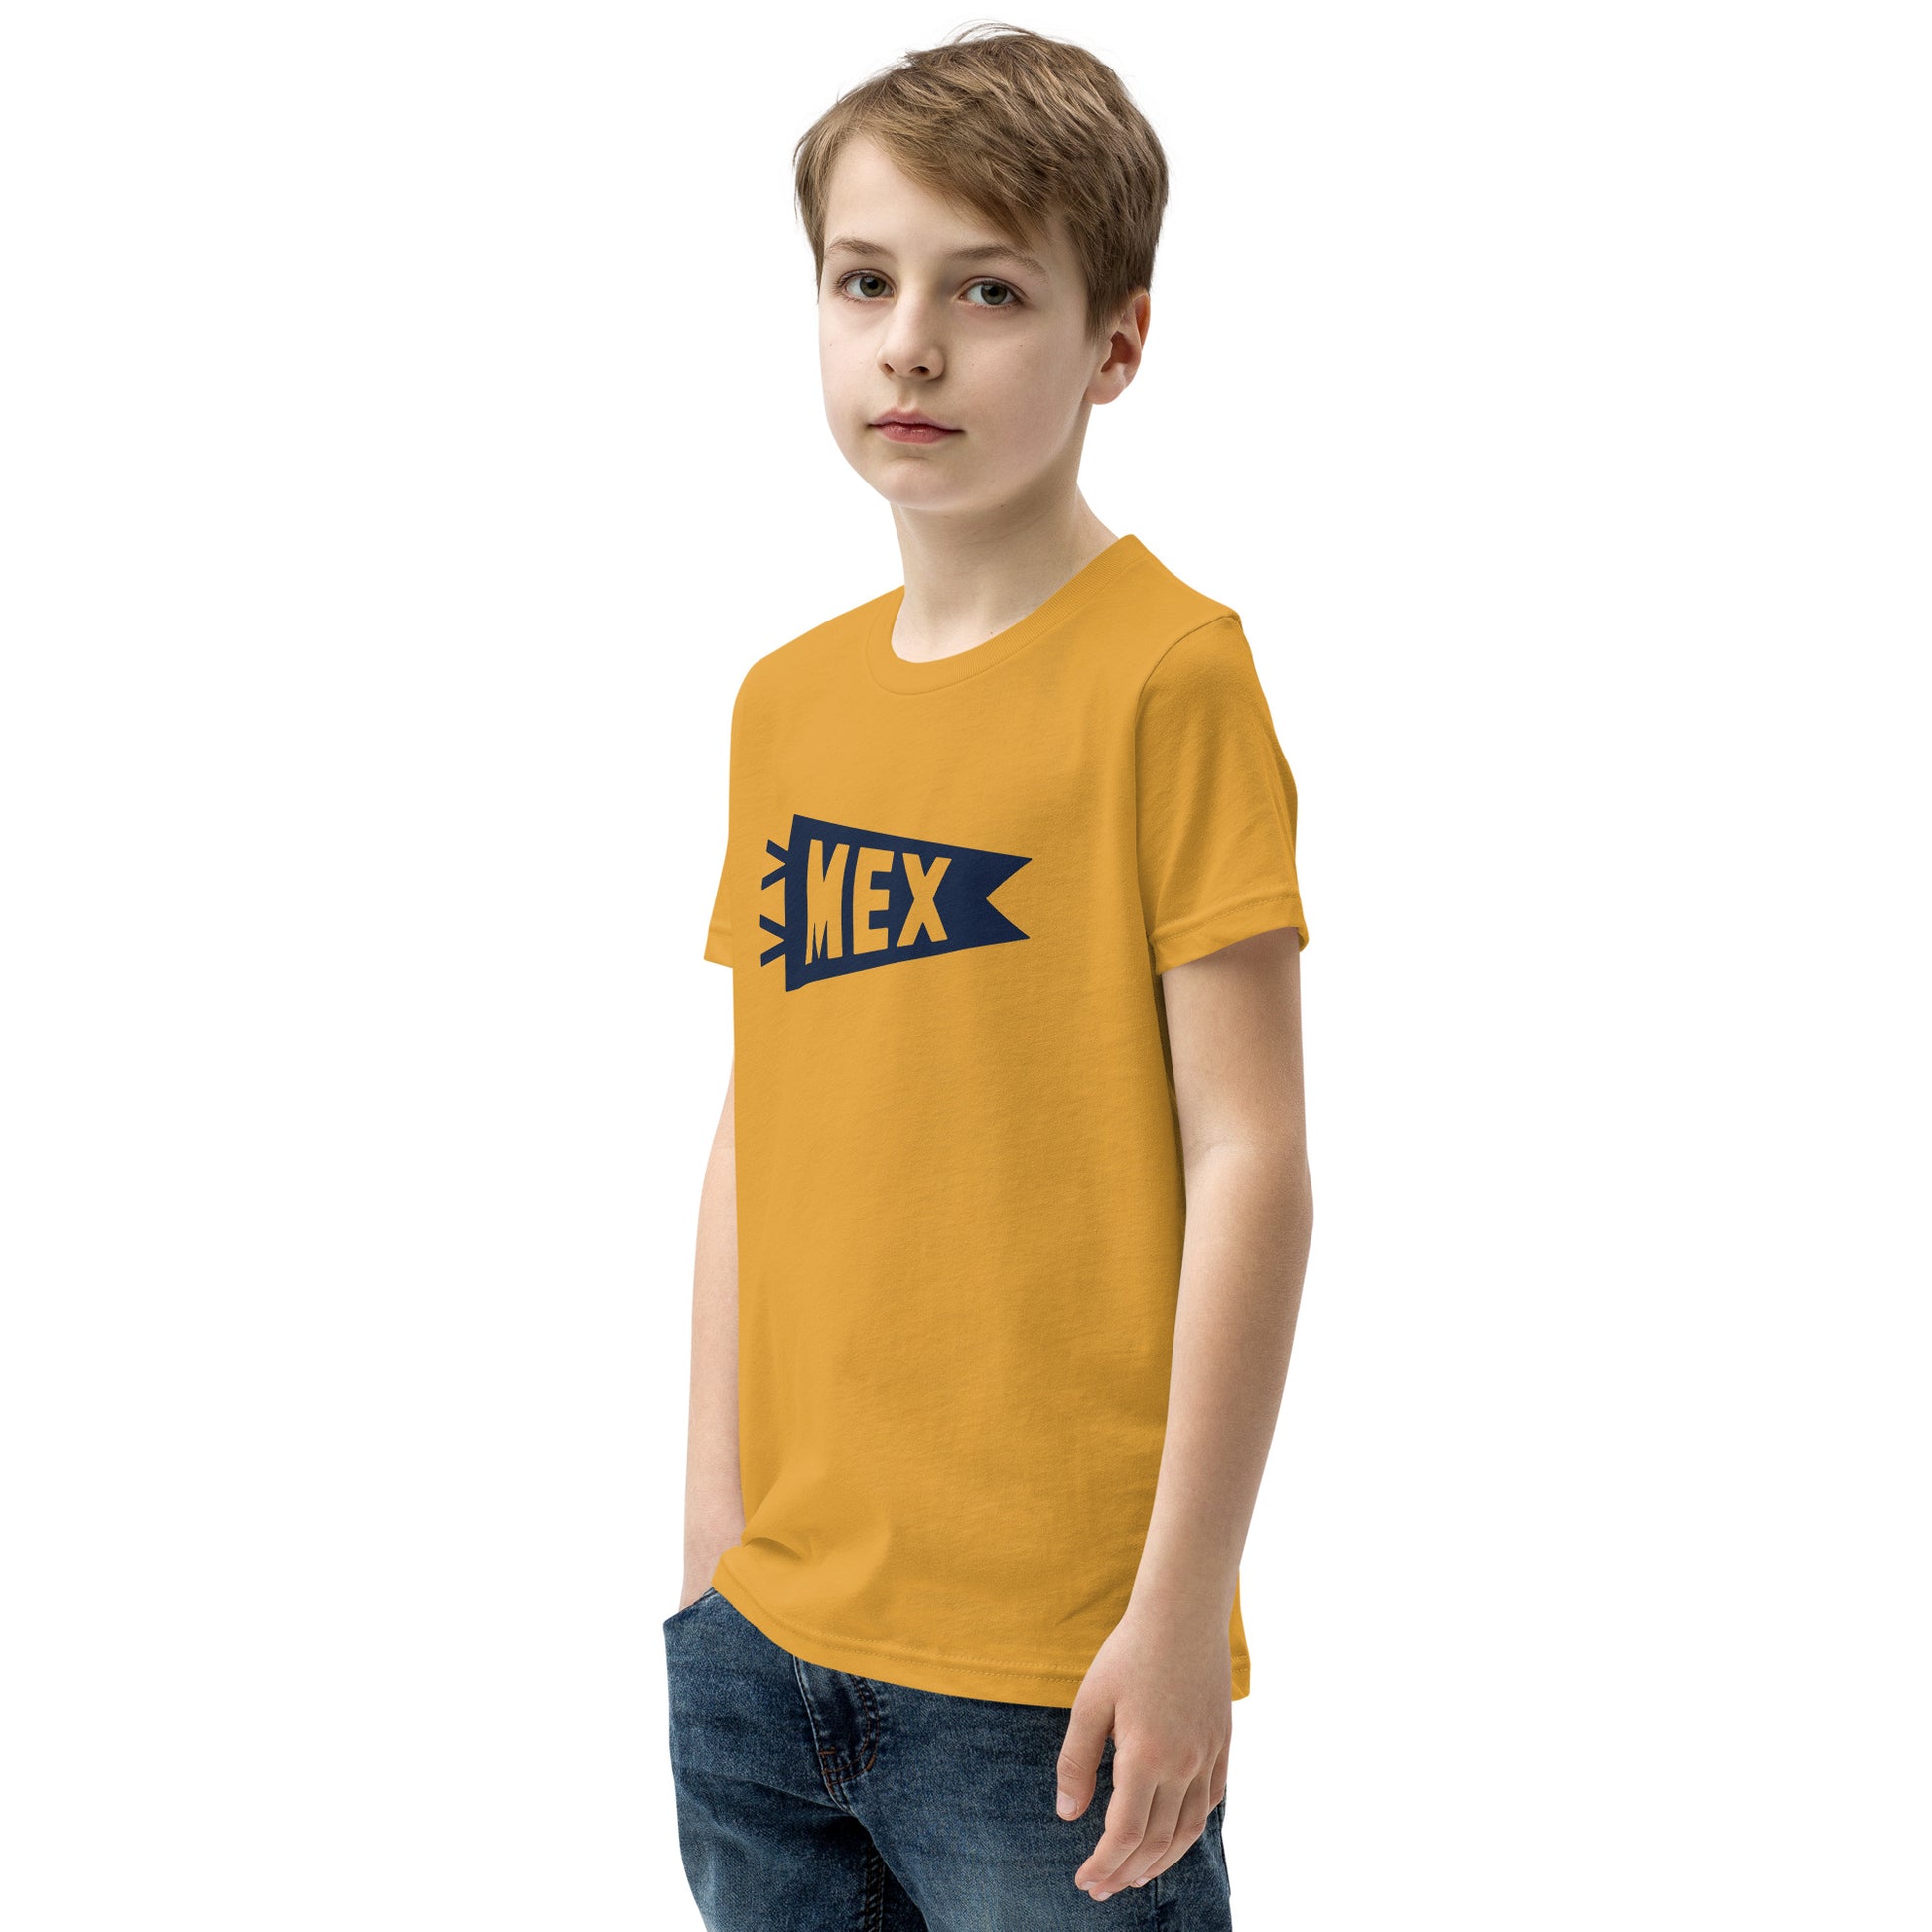 Kid's Airport Code Tee - Navy Blue Graphic • MEX Mexico City • YHM Designs - Image 06